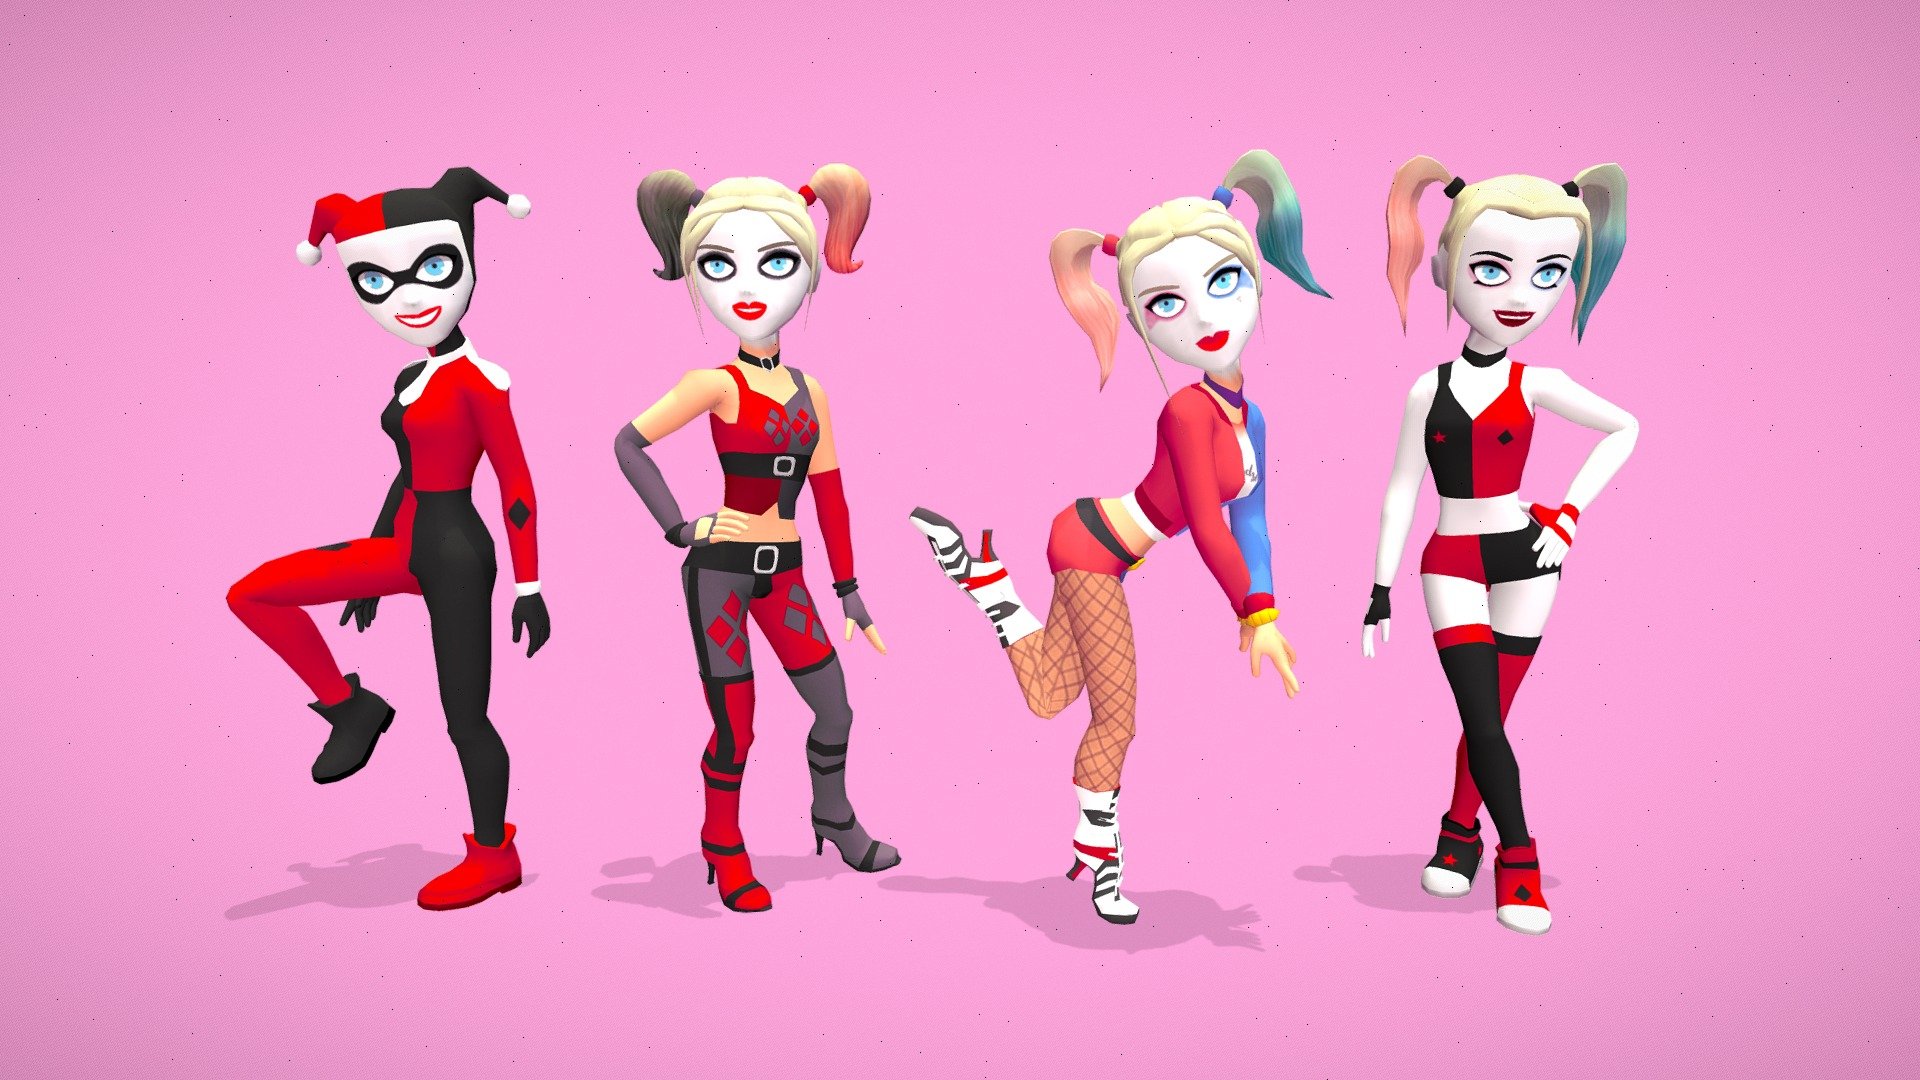 Harley - low poly 3D character. The pack includes several types of characters from different times and interpretations of the comic character.

The pack includes 4 types of Joker character. Each of the characters is a cartoon version of a character from the various films in which the character has been.

4 separate types of character meshes, each with a rig and overall texture

*animations not included

Number of textures - 1 Texture dimensions - 1024x1024 
Polygon count of [Harley_1] - 4574 triangles
Polygon count of [Harley_2] - 7360 triangles
Polygon count of [Harley_3] - 7486 triangles
Polygon count of [Harley_4] - 6266 triangles
Number of meshes/prefabs - 4 
Rigging - Yes UV mapping -Yes

*animations not included - Harley - low poly 3D character - 3D model by Colorful Lions Studio (@colorfullionsstudio) 3d model